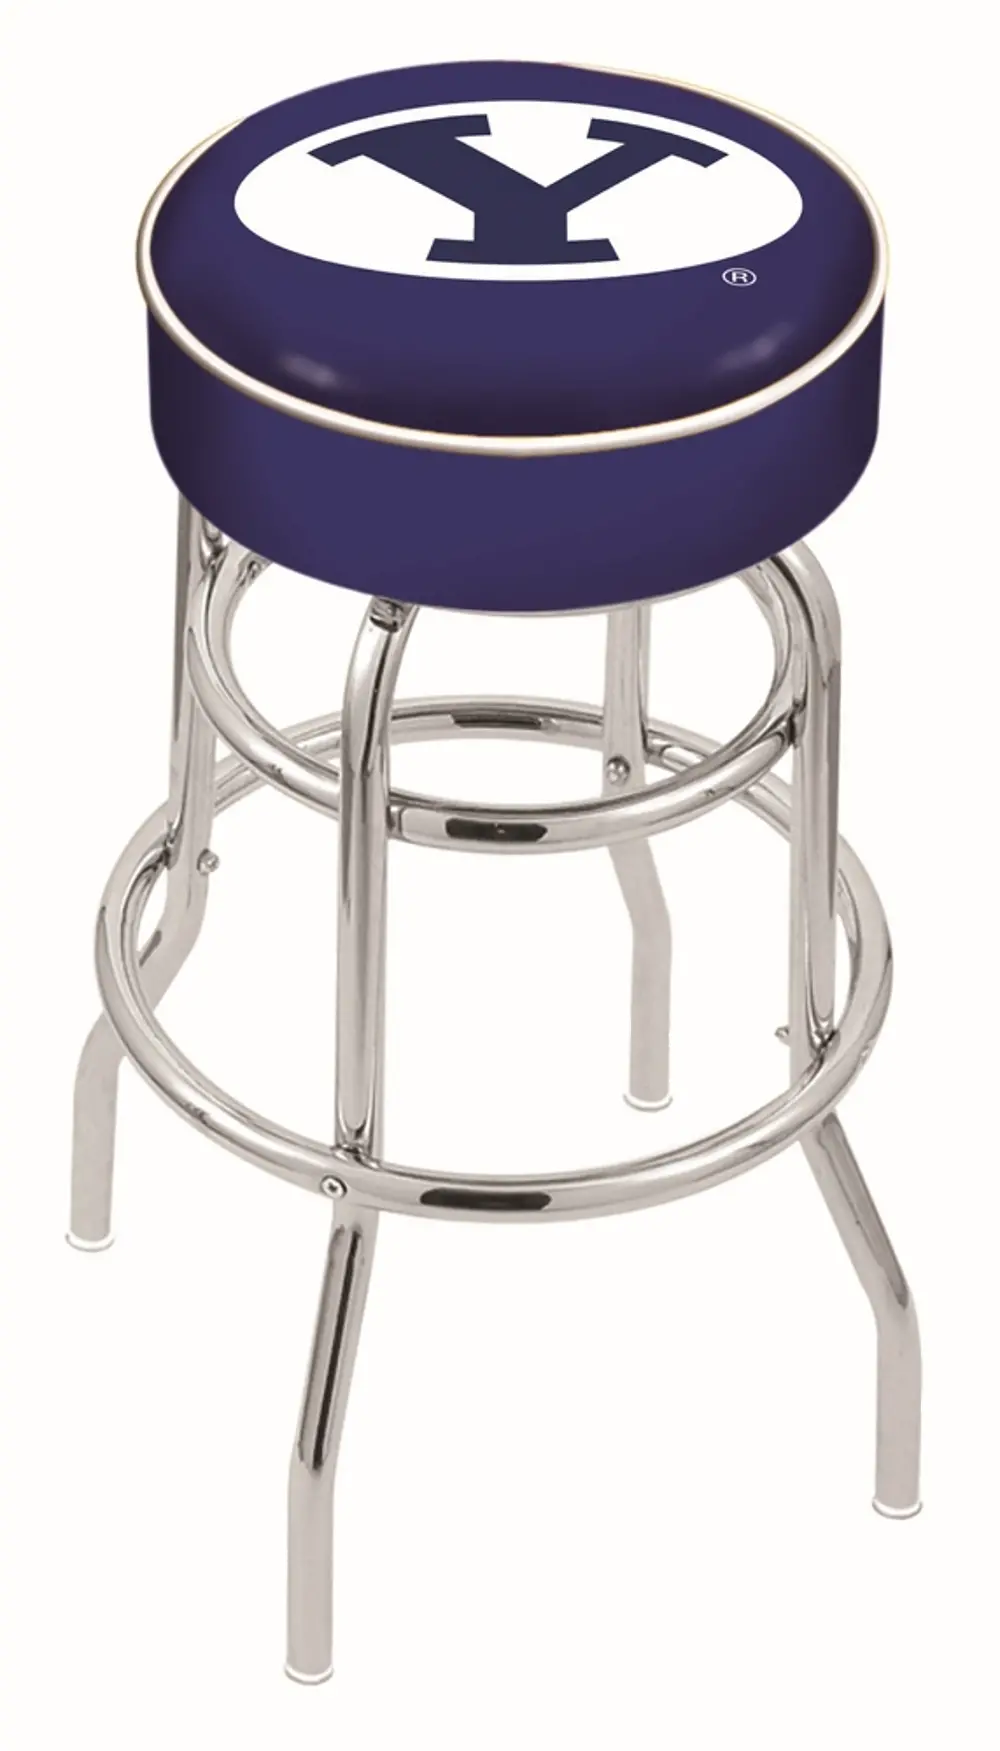 Chrome Double Ring Swivel Counter Height Stool - BYU-1